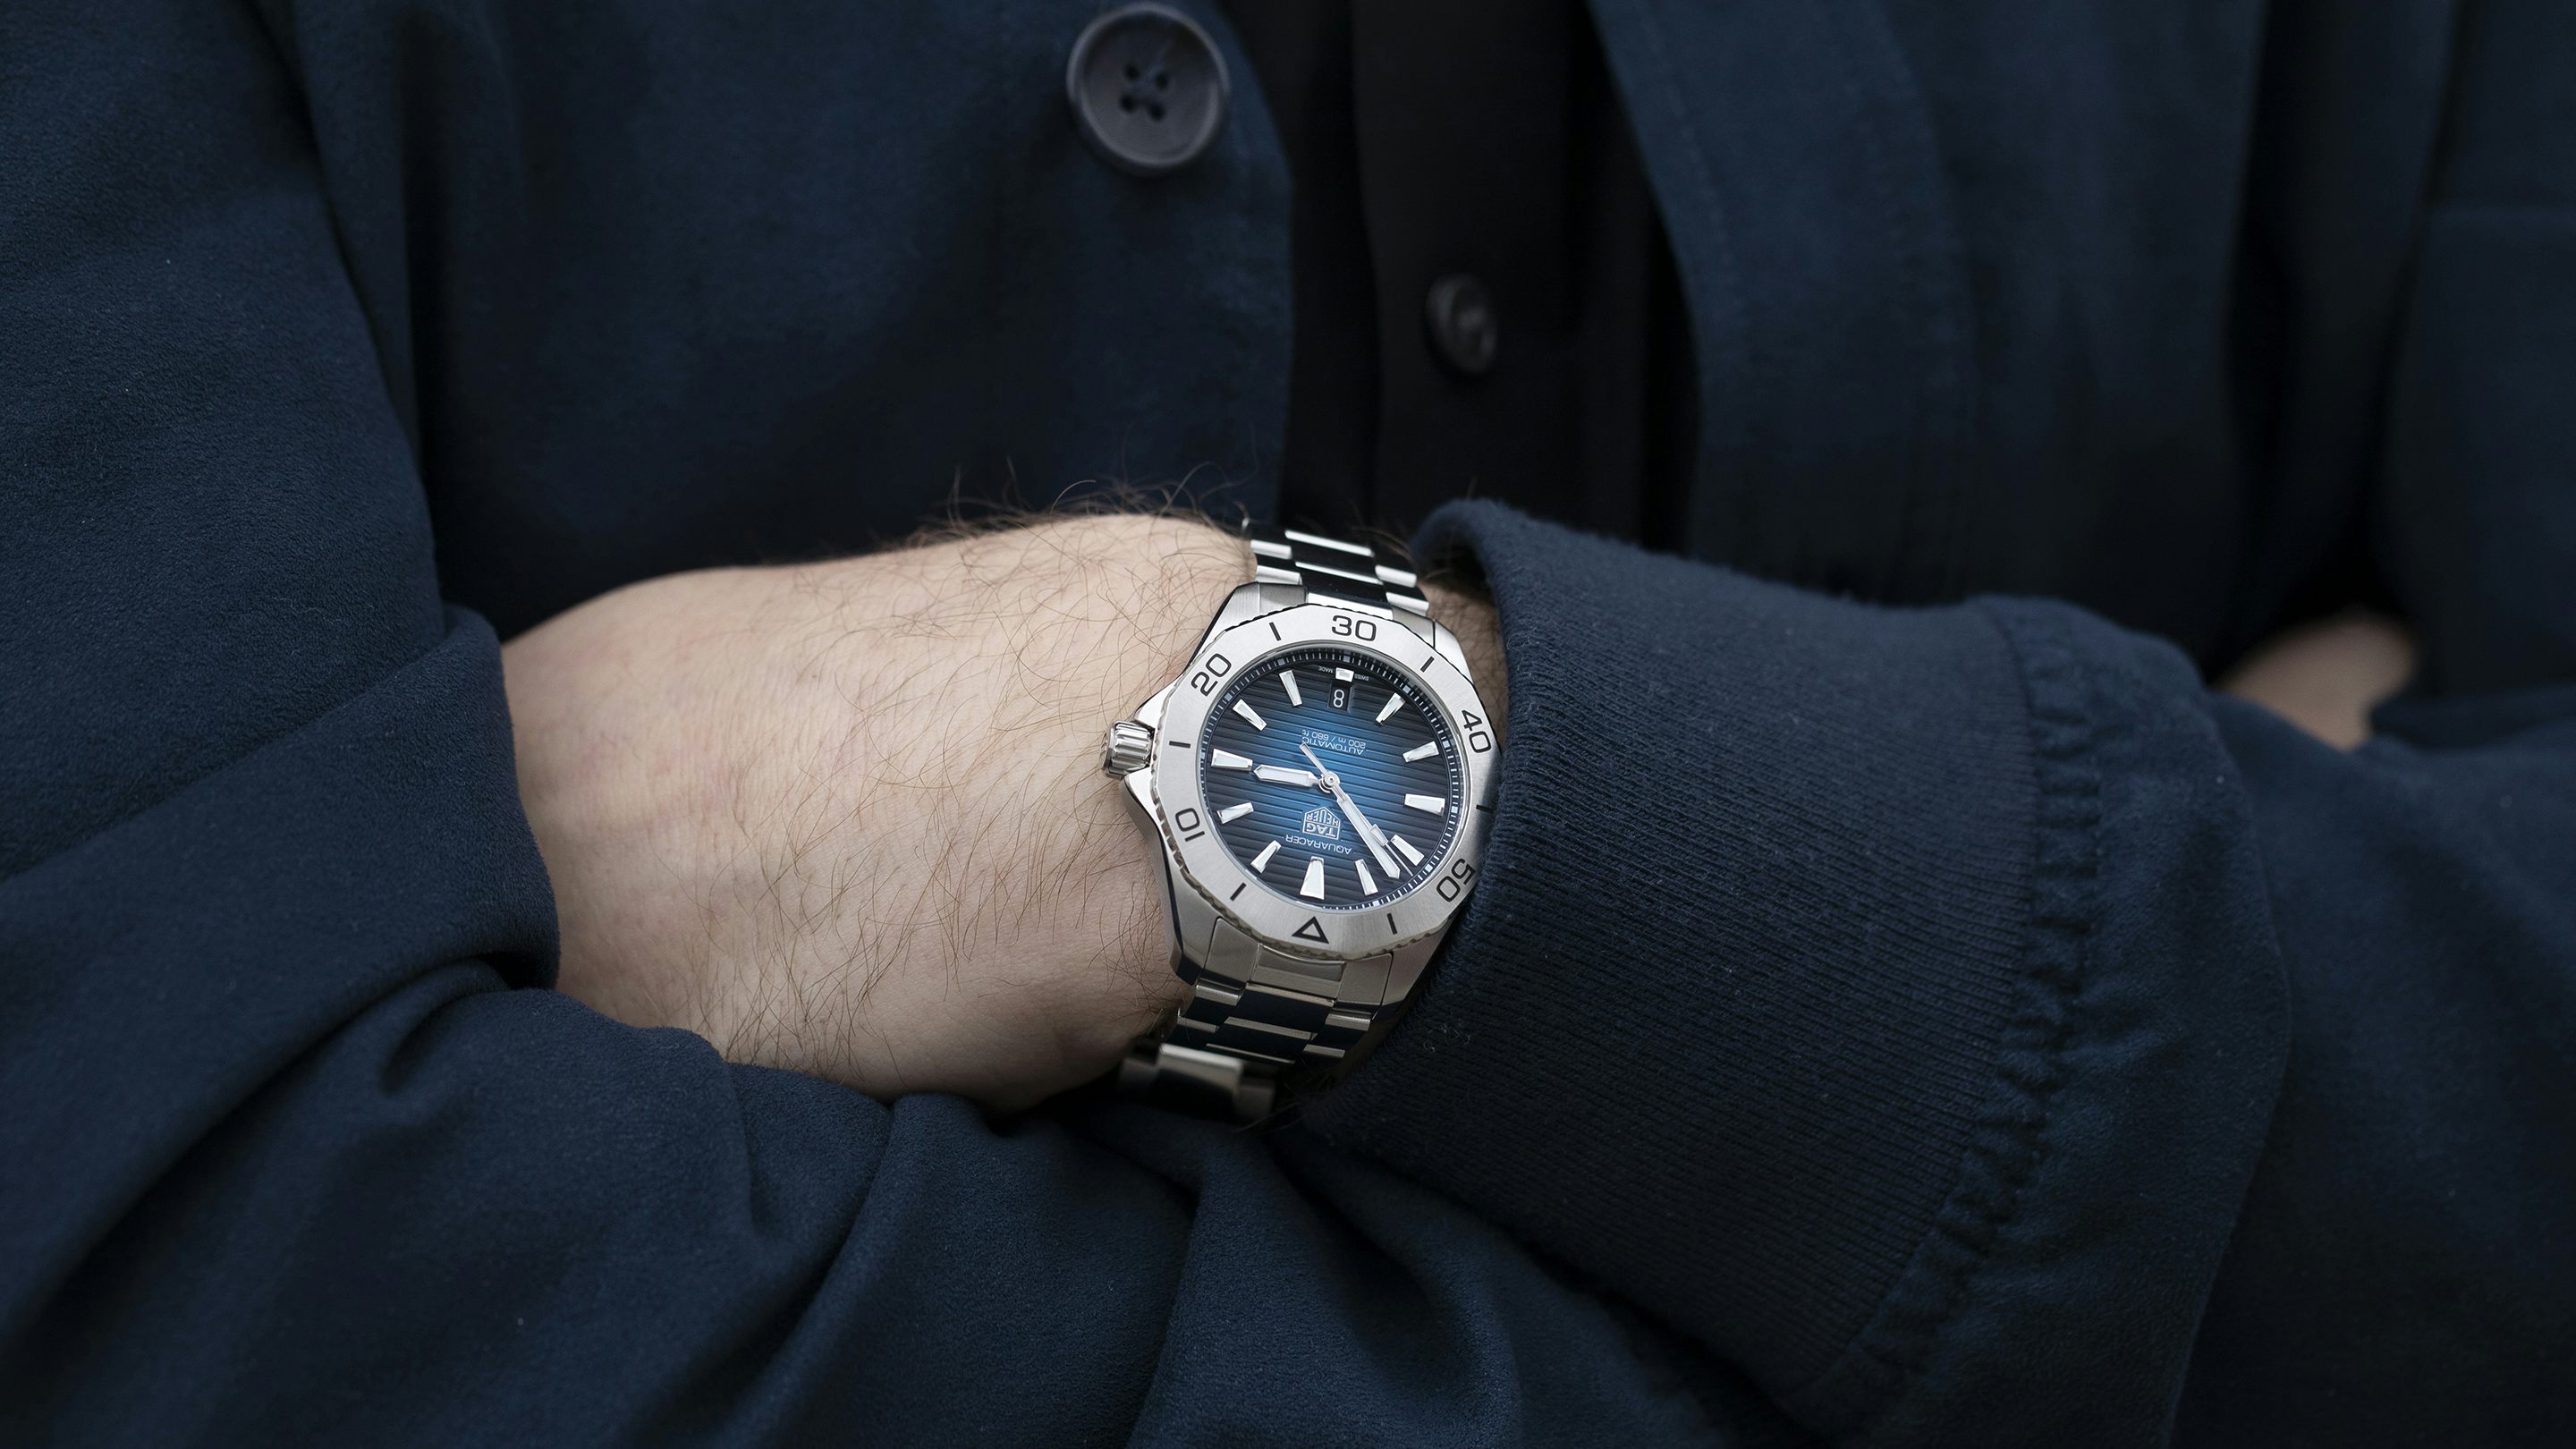 Tag Heuer Aquaracer Review & 5 Things You Should Know